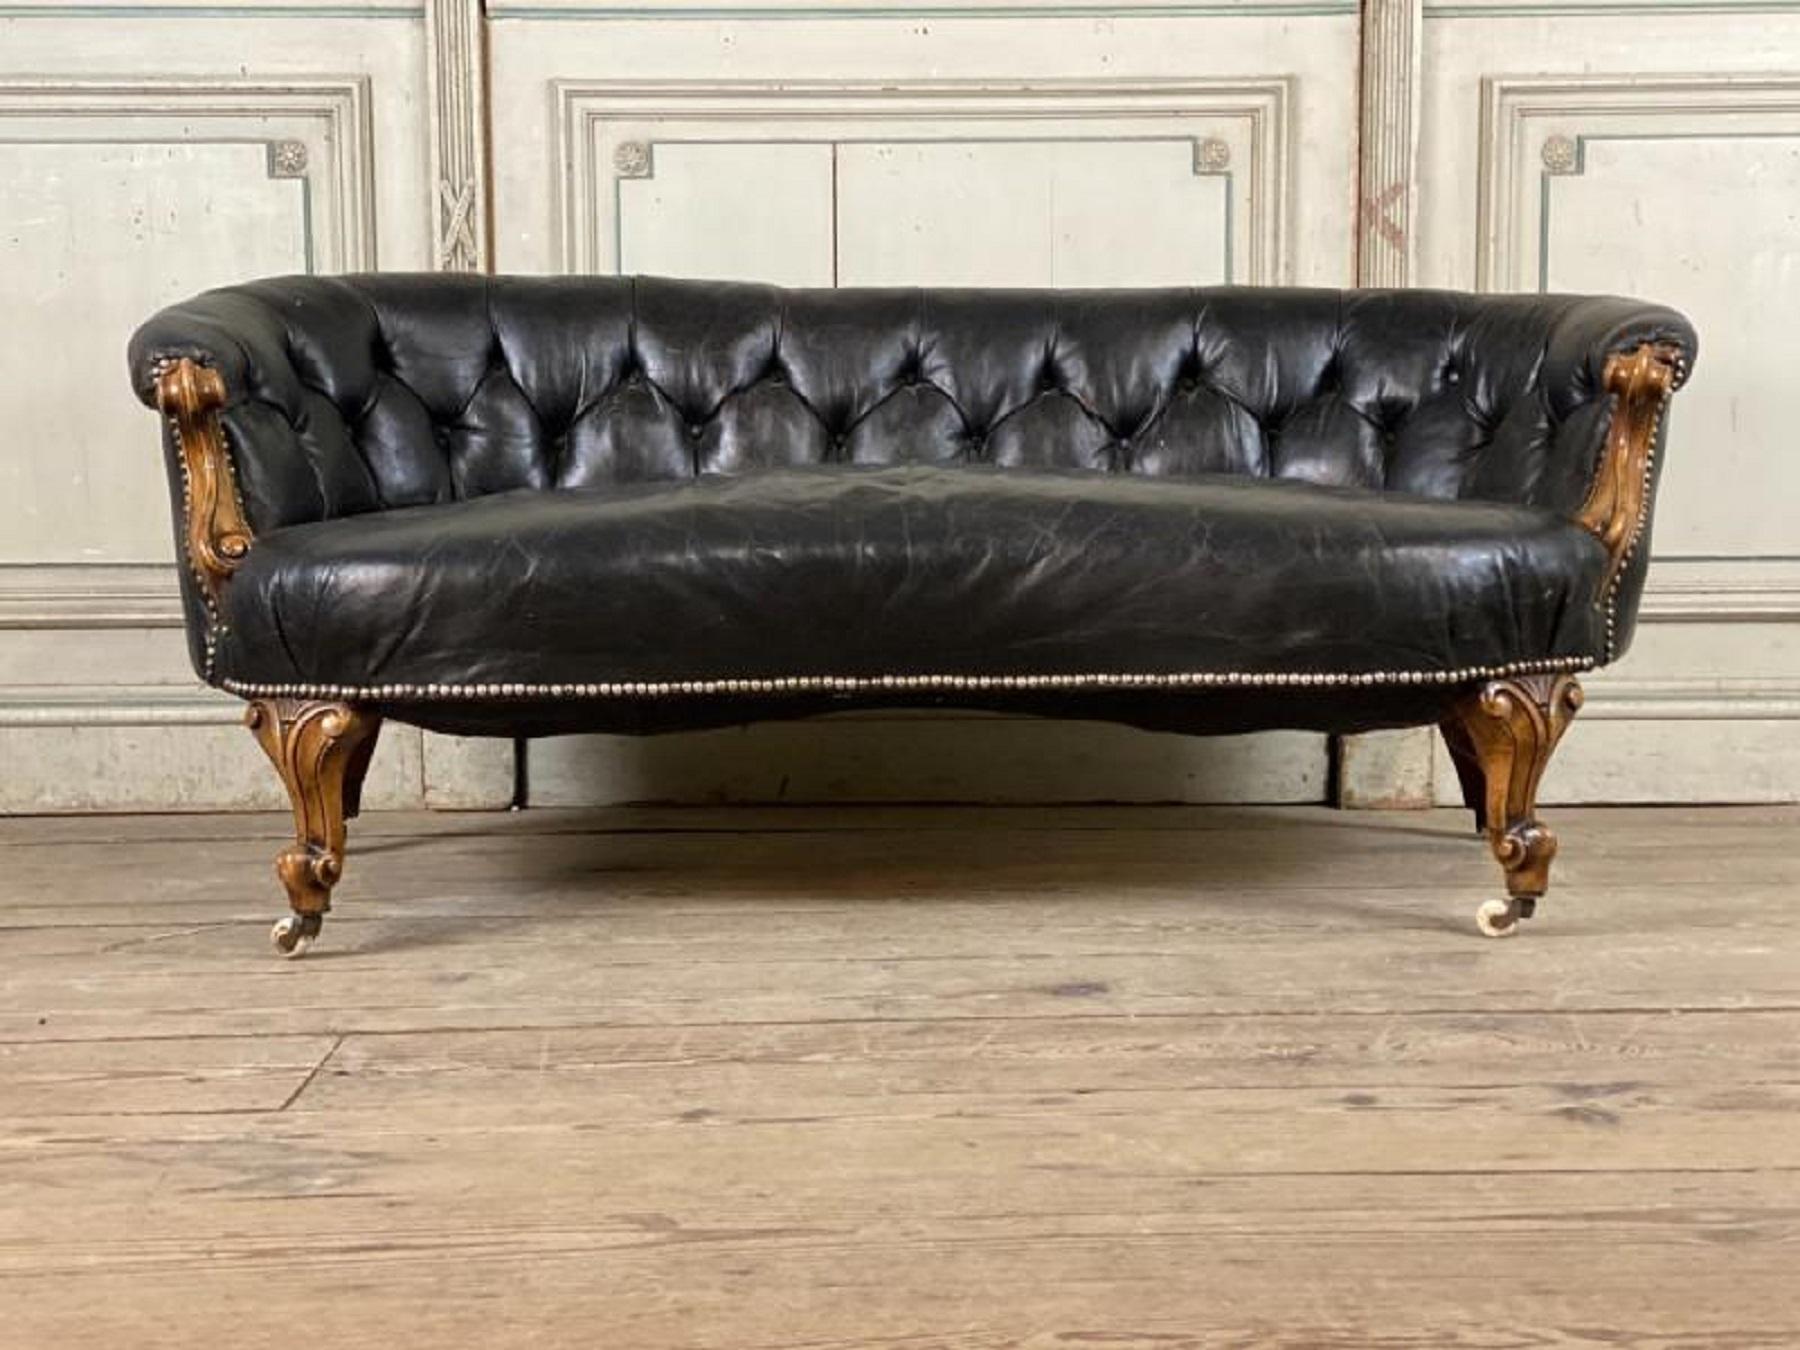 Curved Victorian sofa, carved walnut and leather.